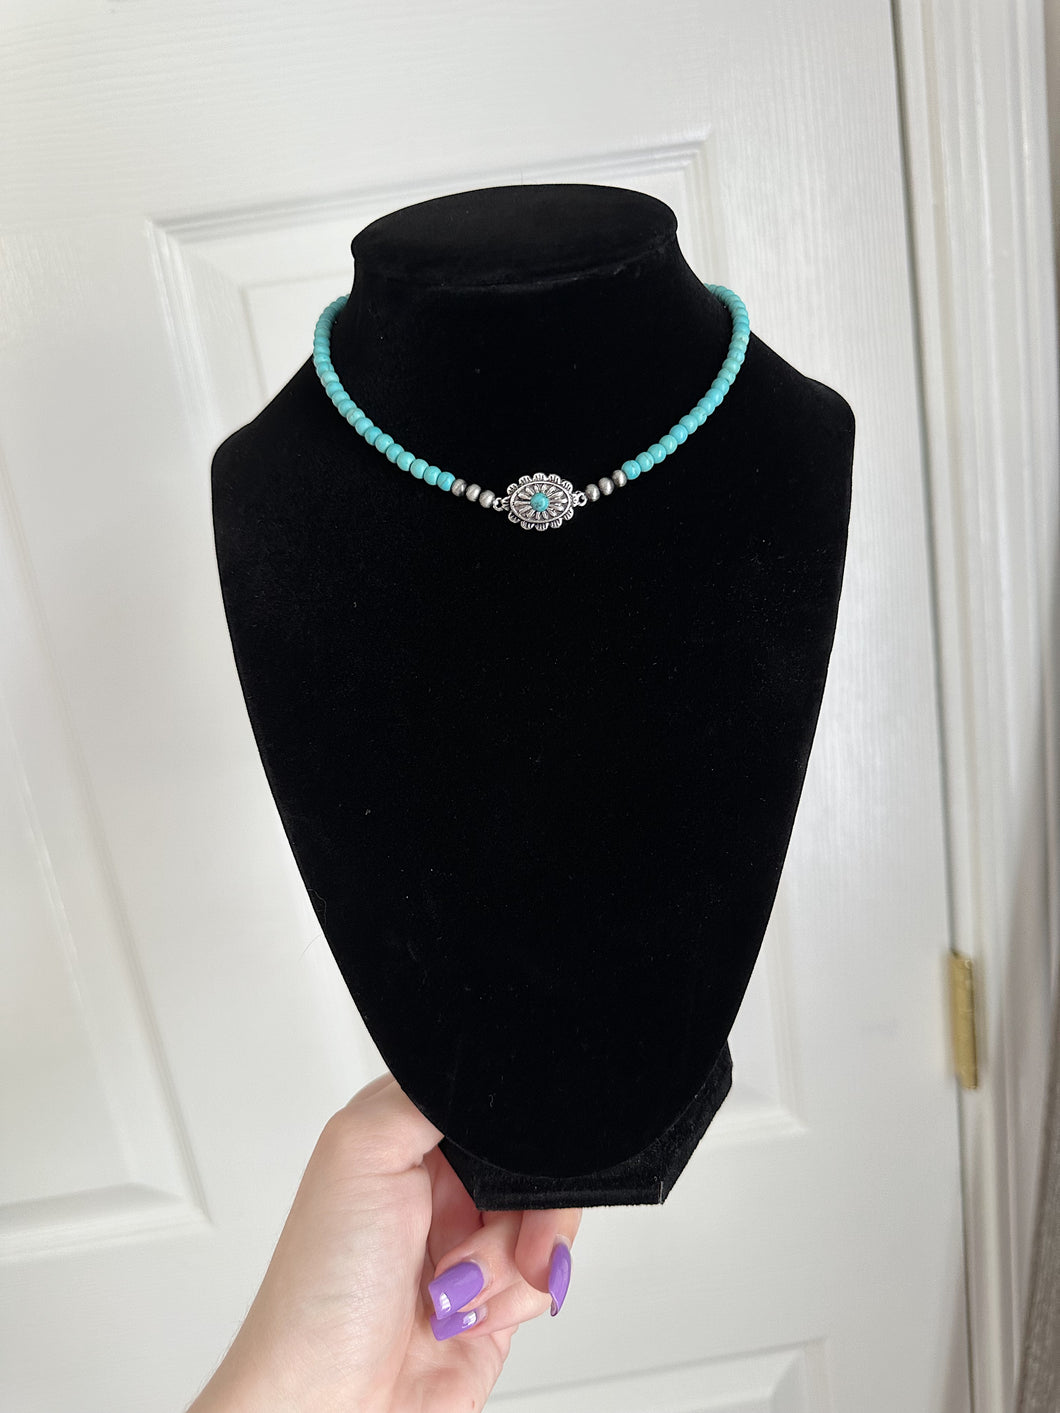 The Turquoise Concho Choker